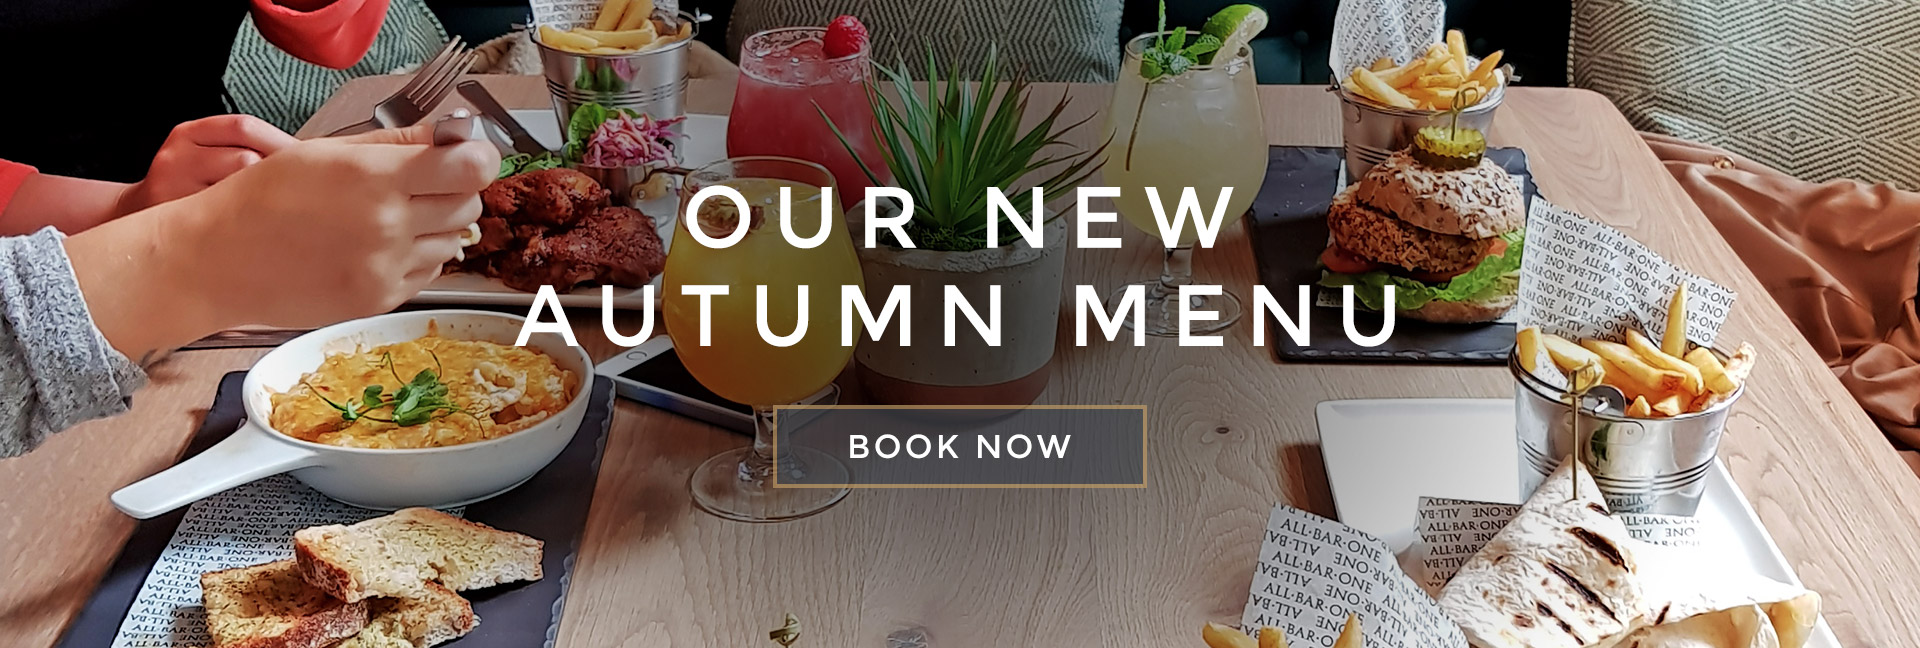 Our new Autumn menu at All Bar One Leicester Square - Book now